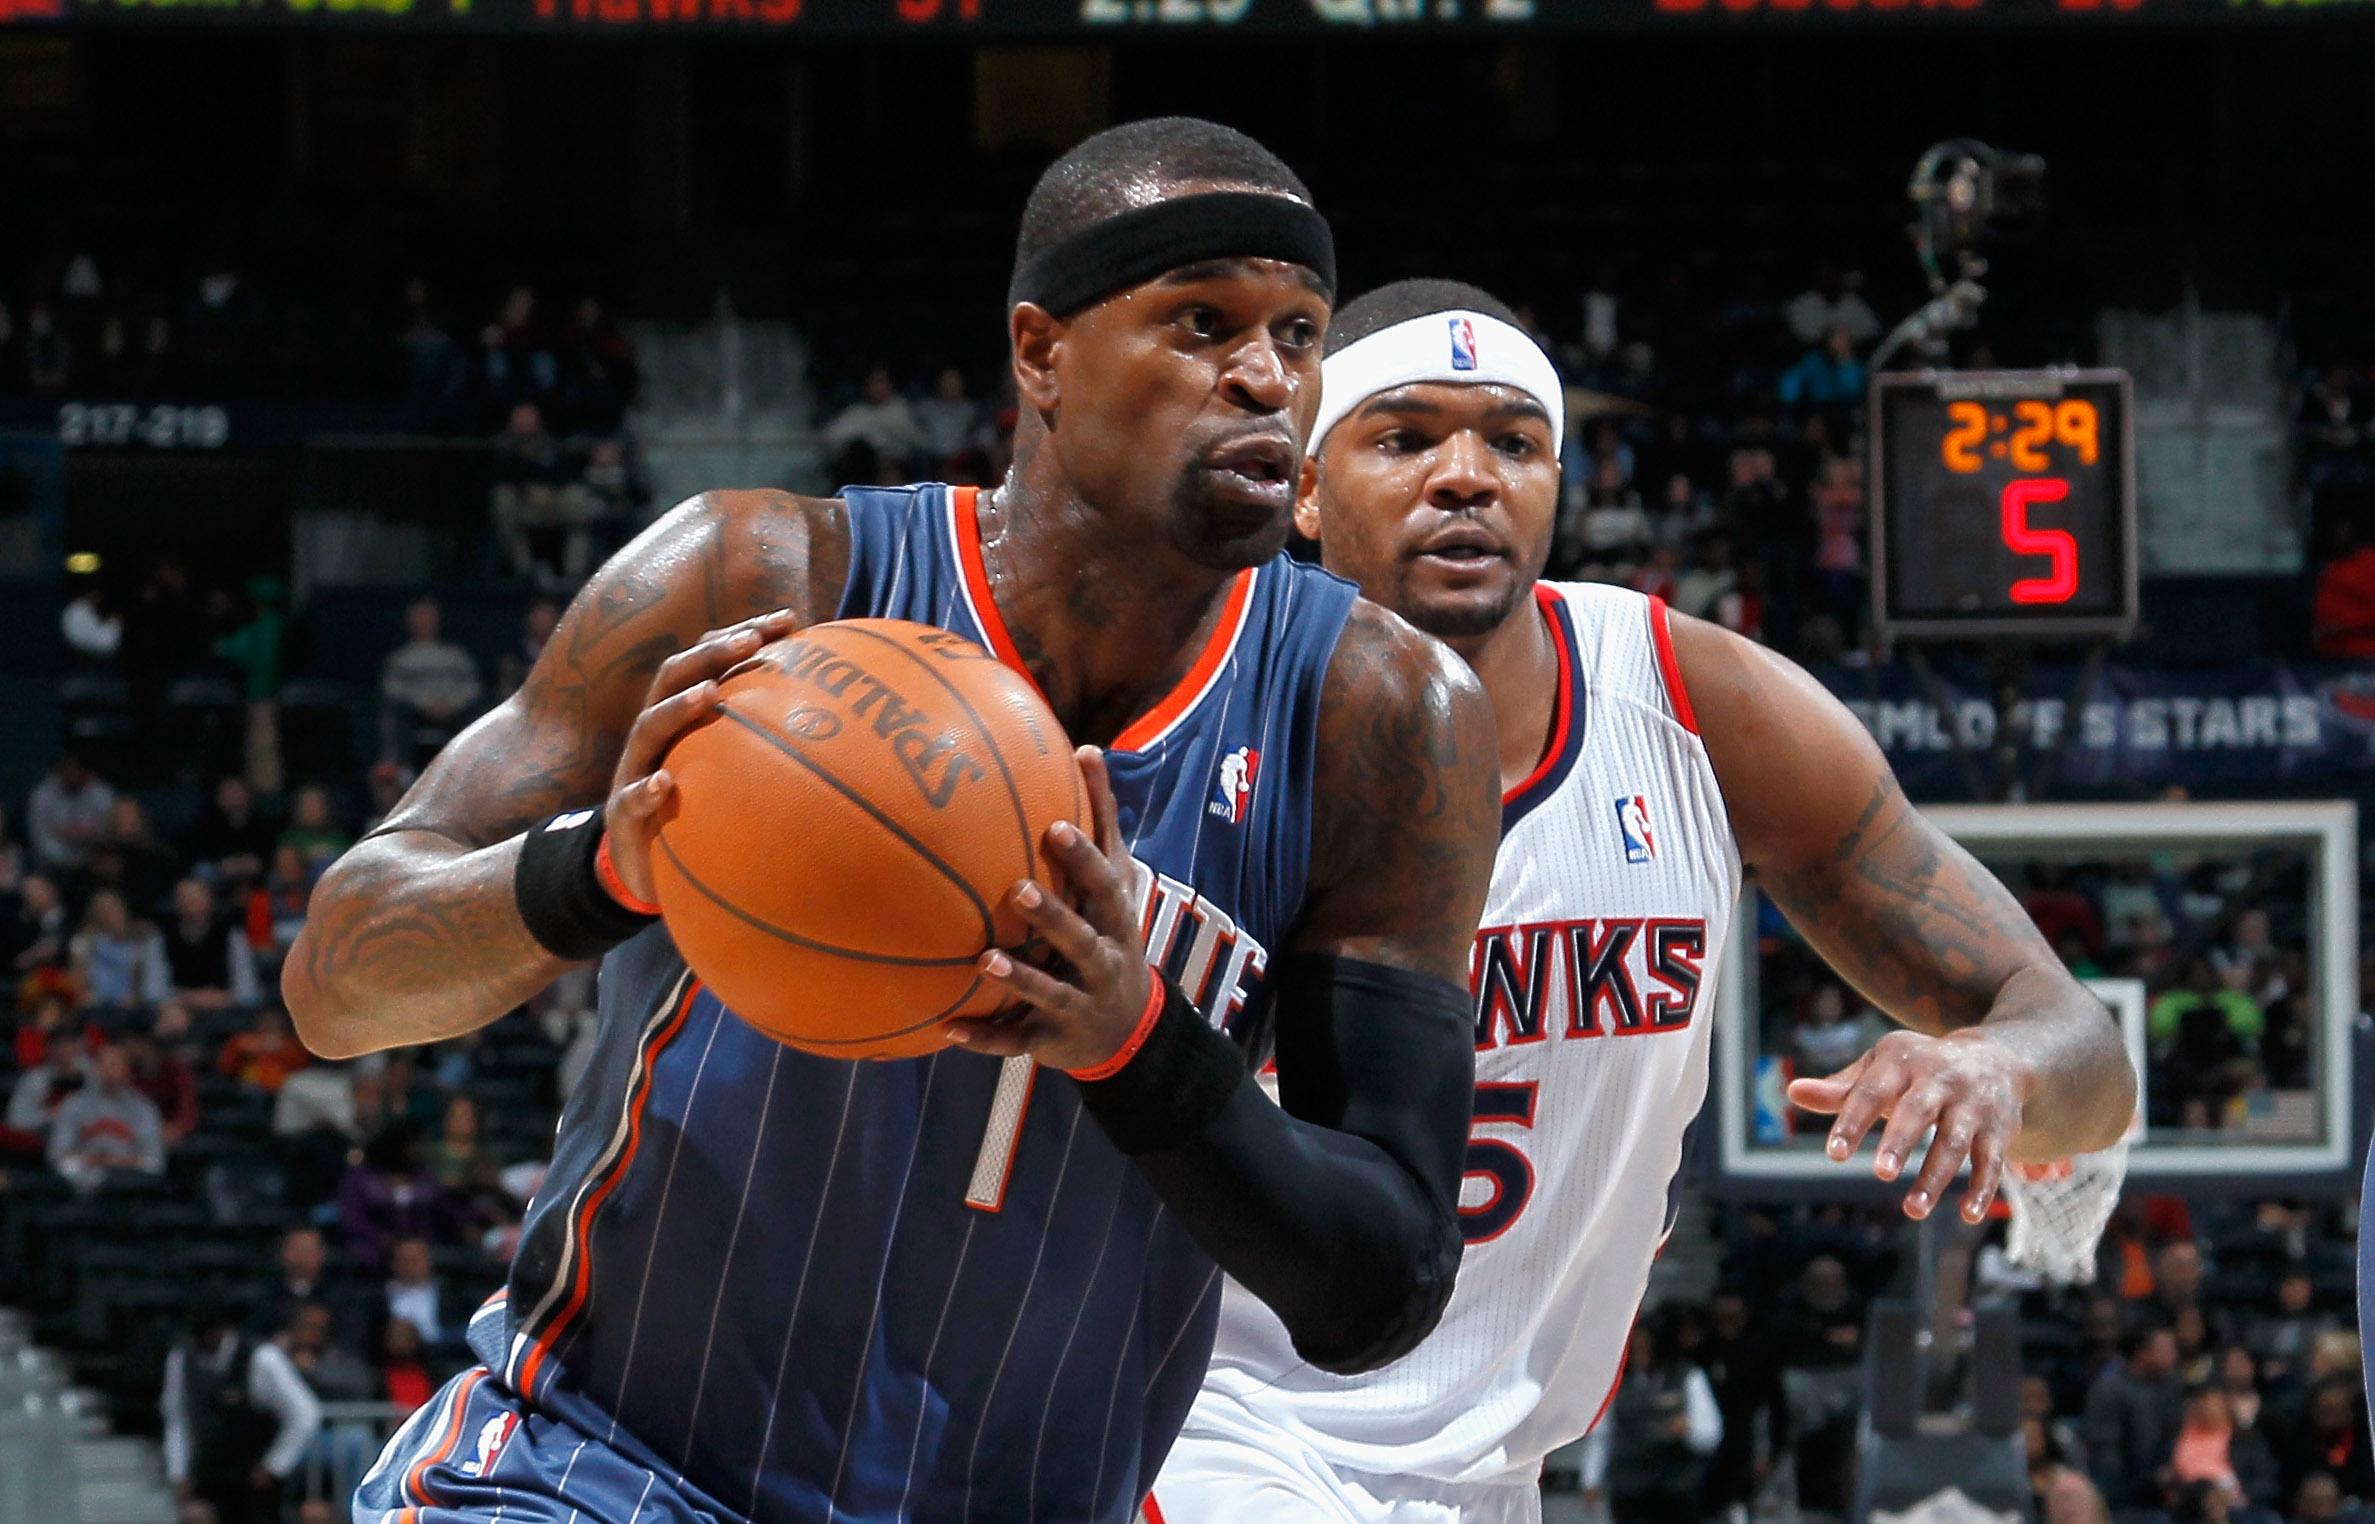 ATLANTA, GA - FEBRUARY 12:  Stephen Jackson #1 of the Charlotte Bobcats drives past Josh Smith #5 of the Atlanta Hawks at Philips Arena on February 12, 2011 in Atlanta, Georgia.  NOTE TO USER: User expressly acknowledges and agrees that, by downloading an